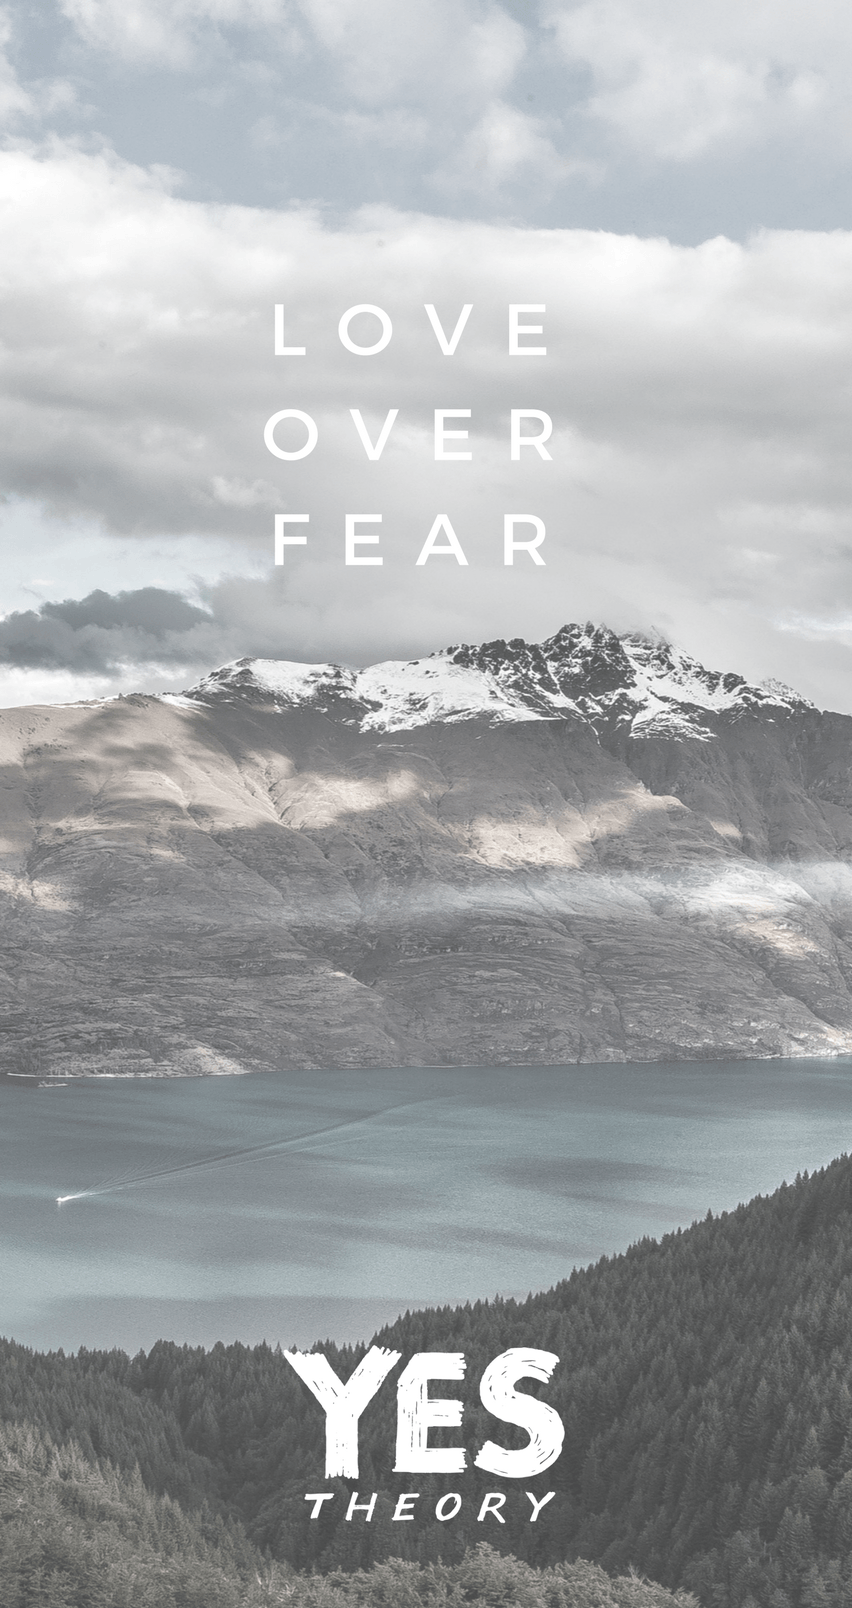 Yes Theory “Love Over Fear” Phone Wallpaper